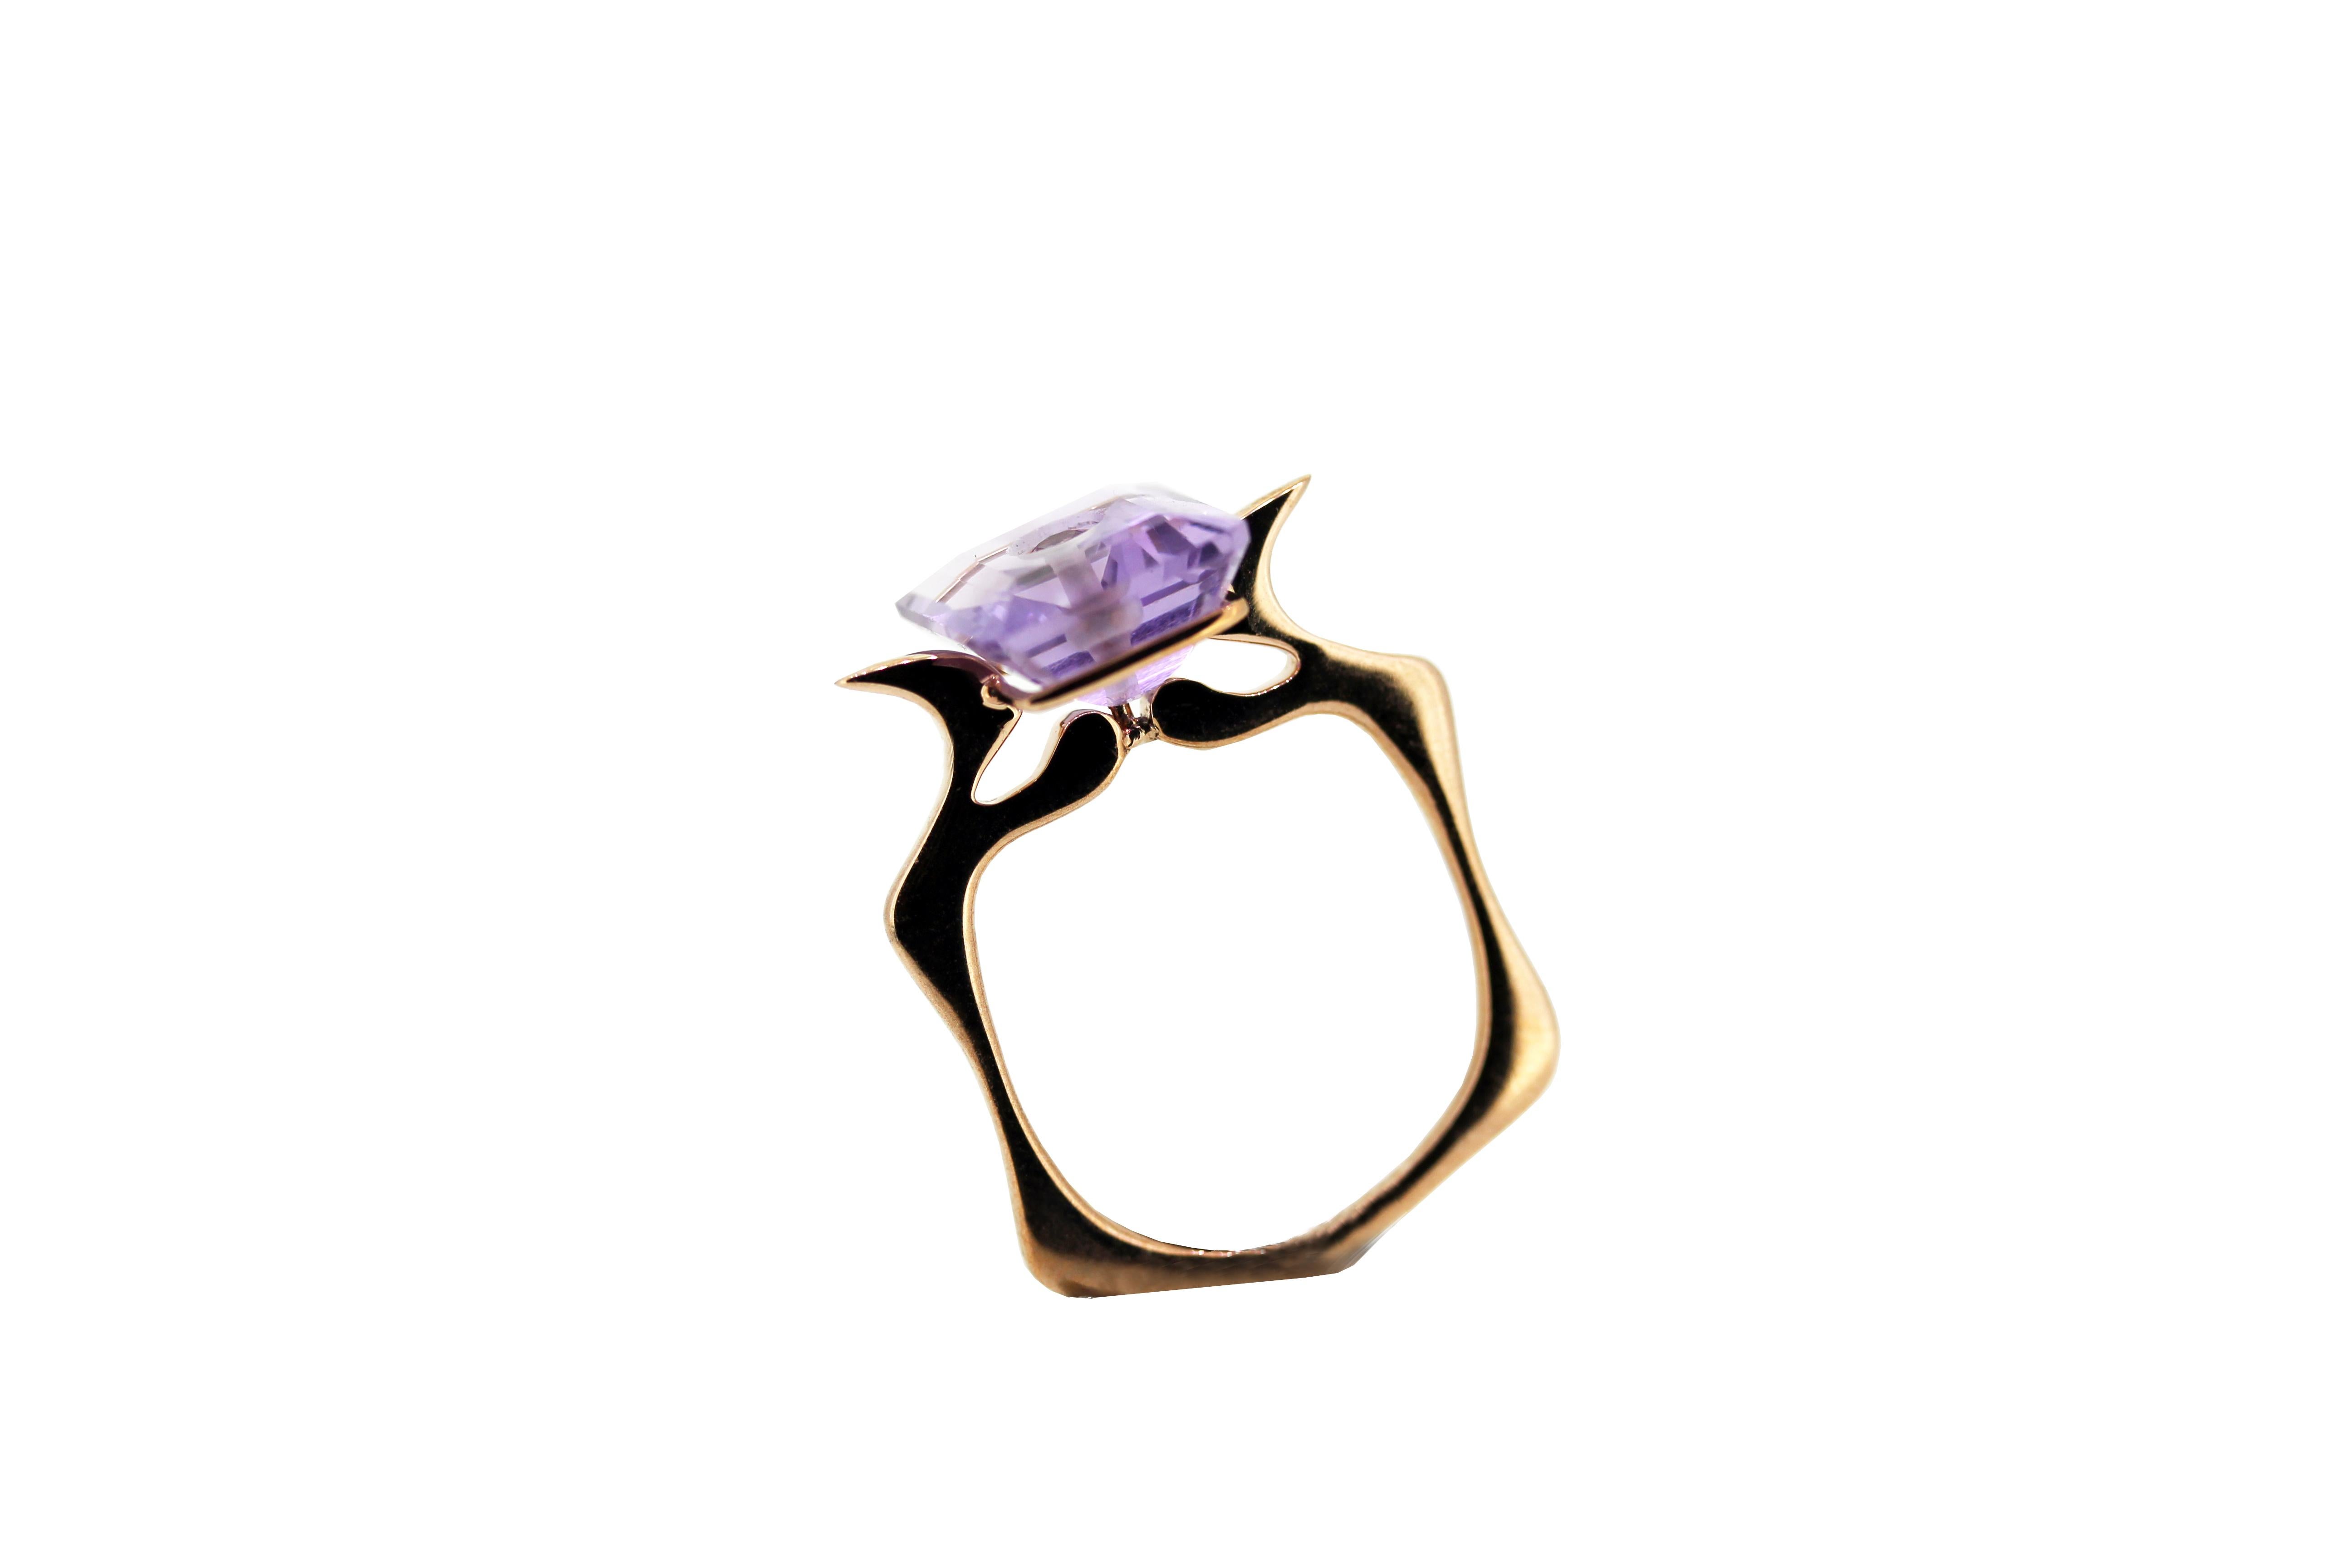 This modern handmade British-London Hallmarked 9 karat yellow gold ring, set with natural amethyst and ruby is from MAIKO NAGAYAMA's one of the Pret-a-porter Collection called 